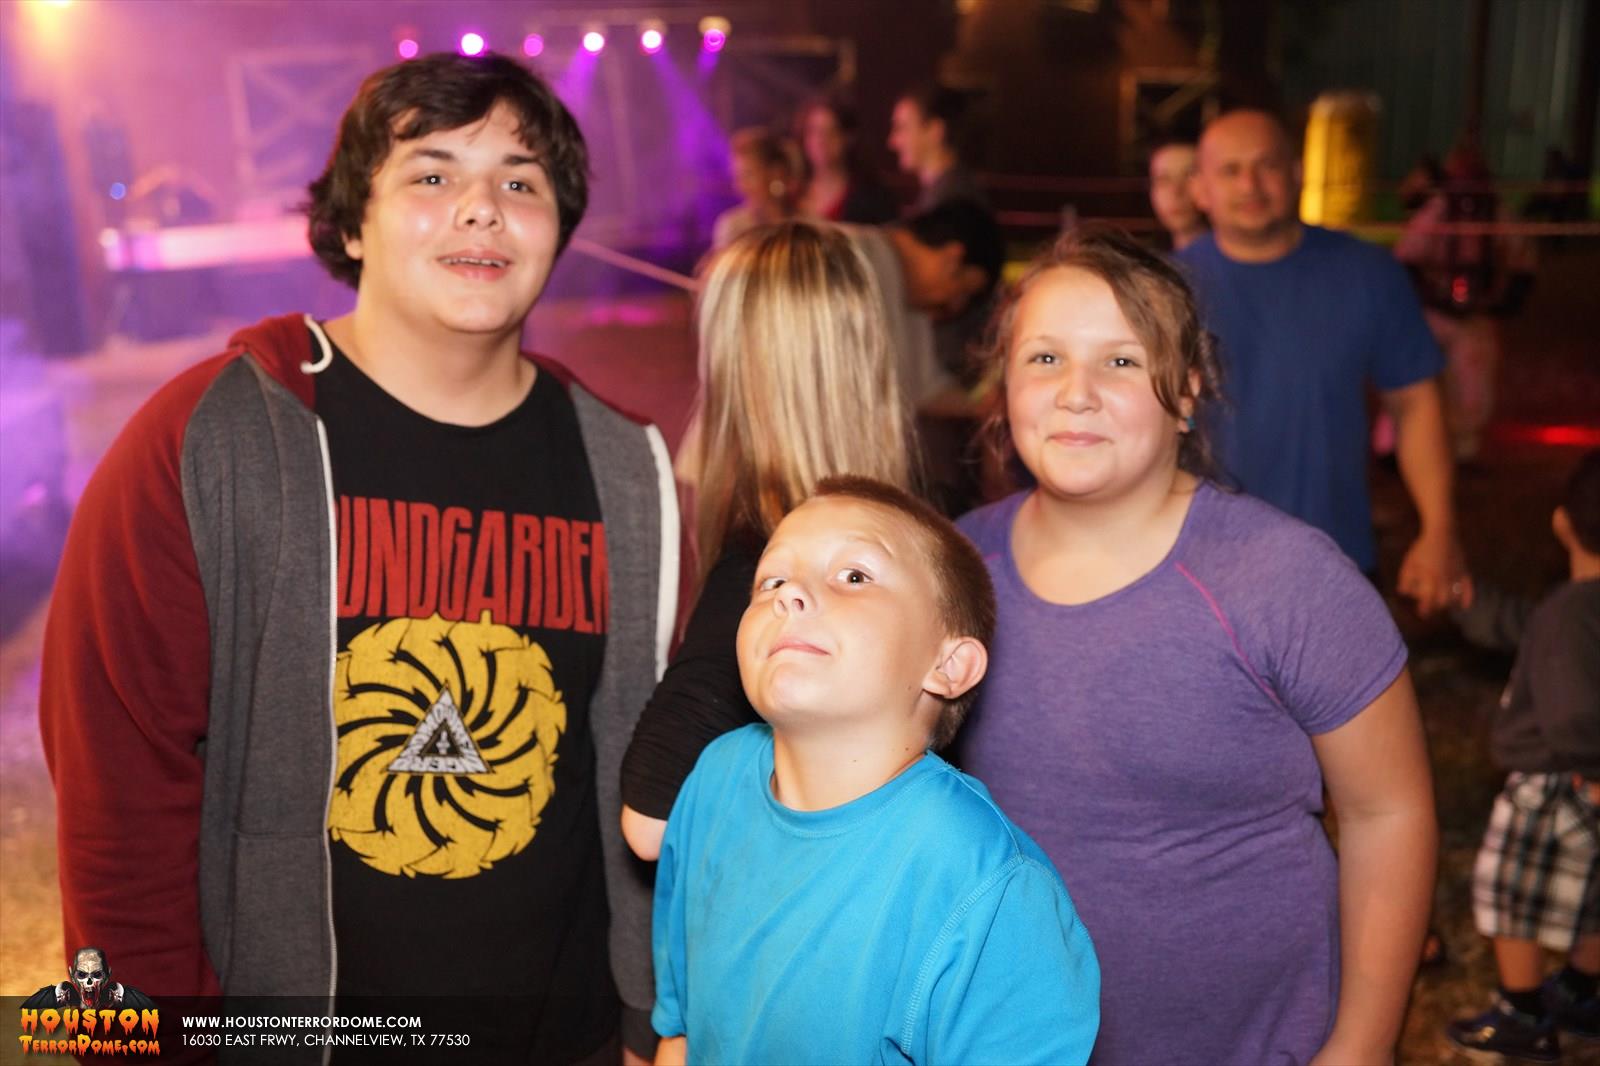 Family waits in line, kid in blue shirt shows scary pose for camera